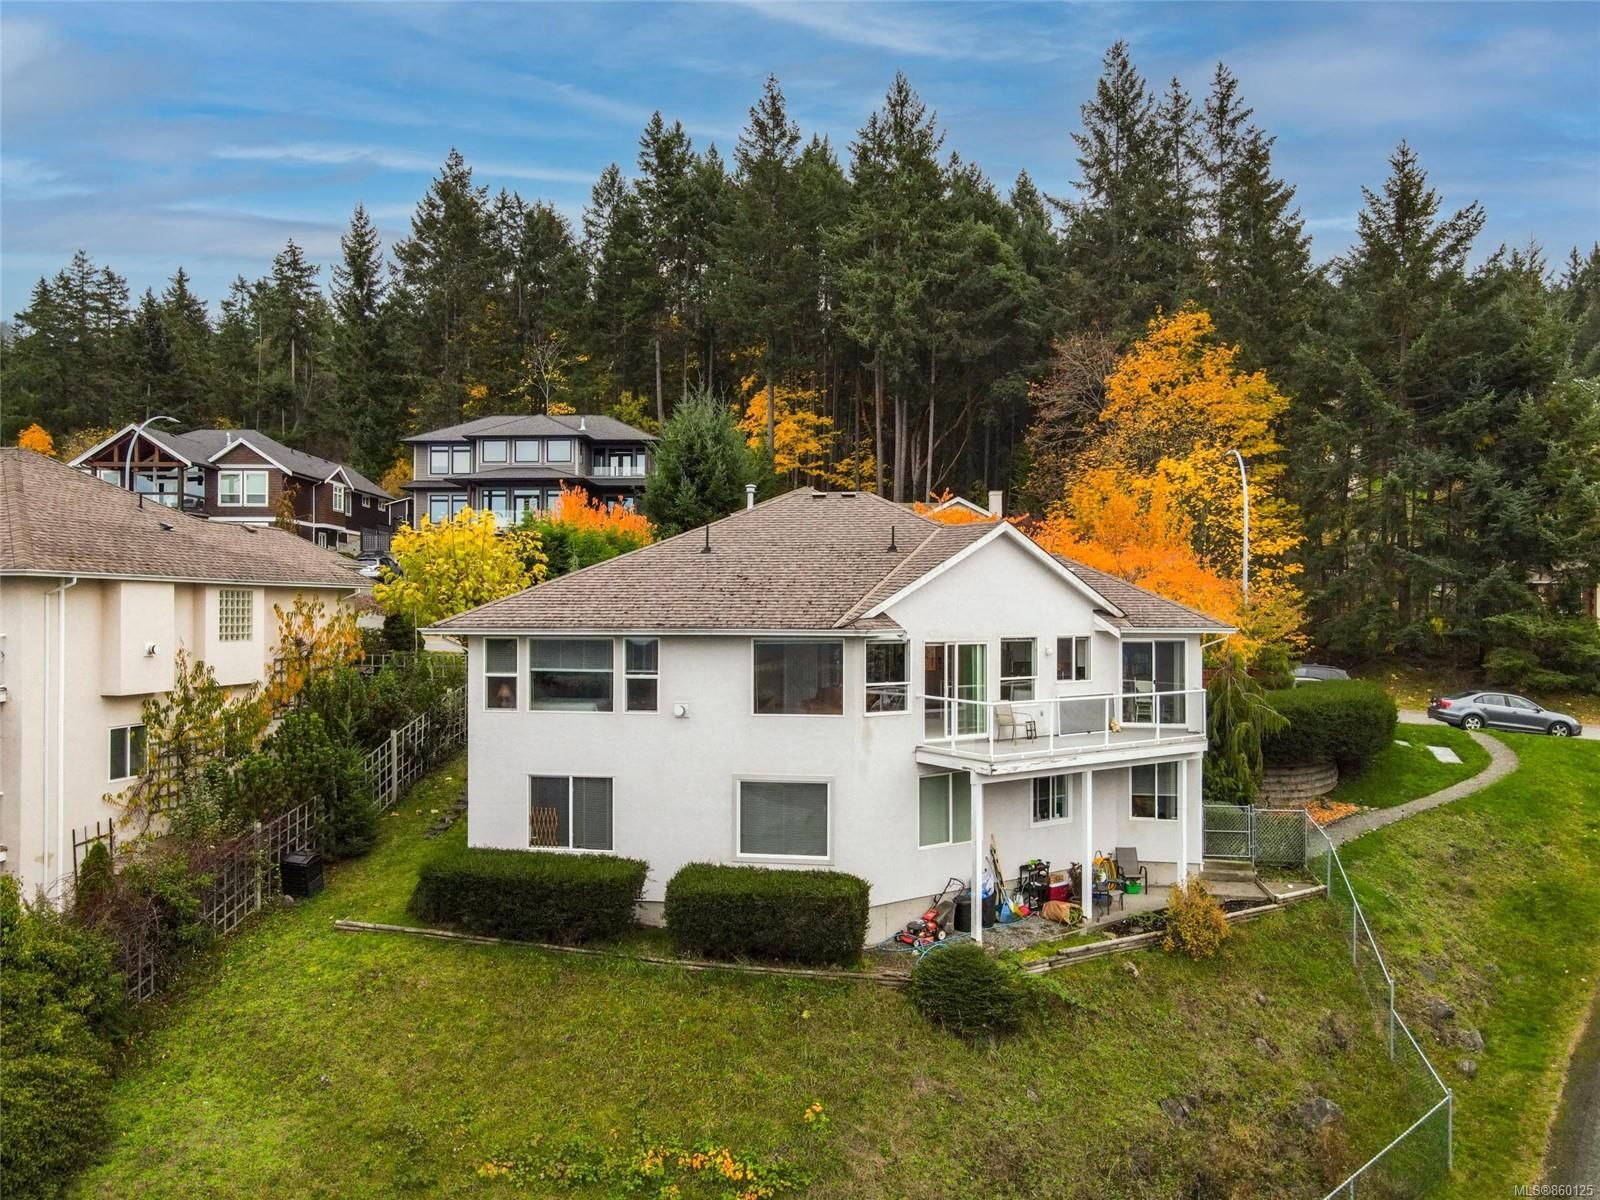 I have sold a property at 6005 Salish Rd
